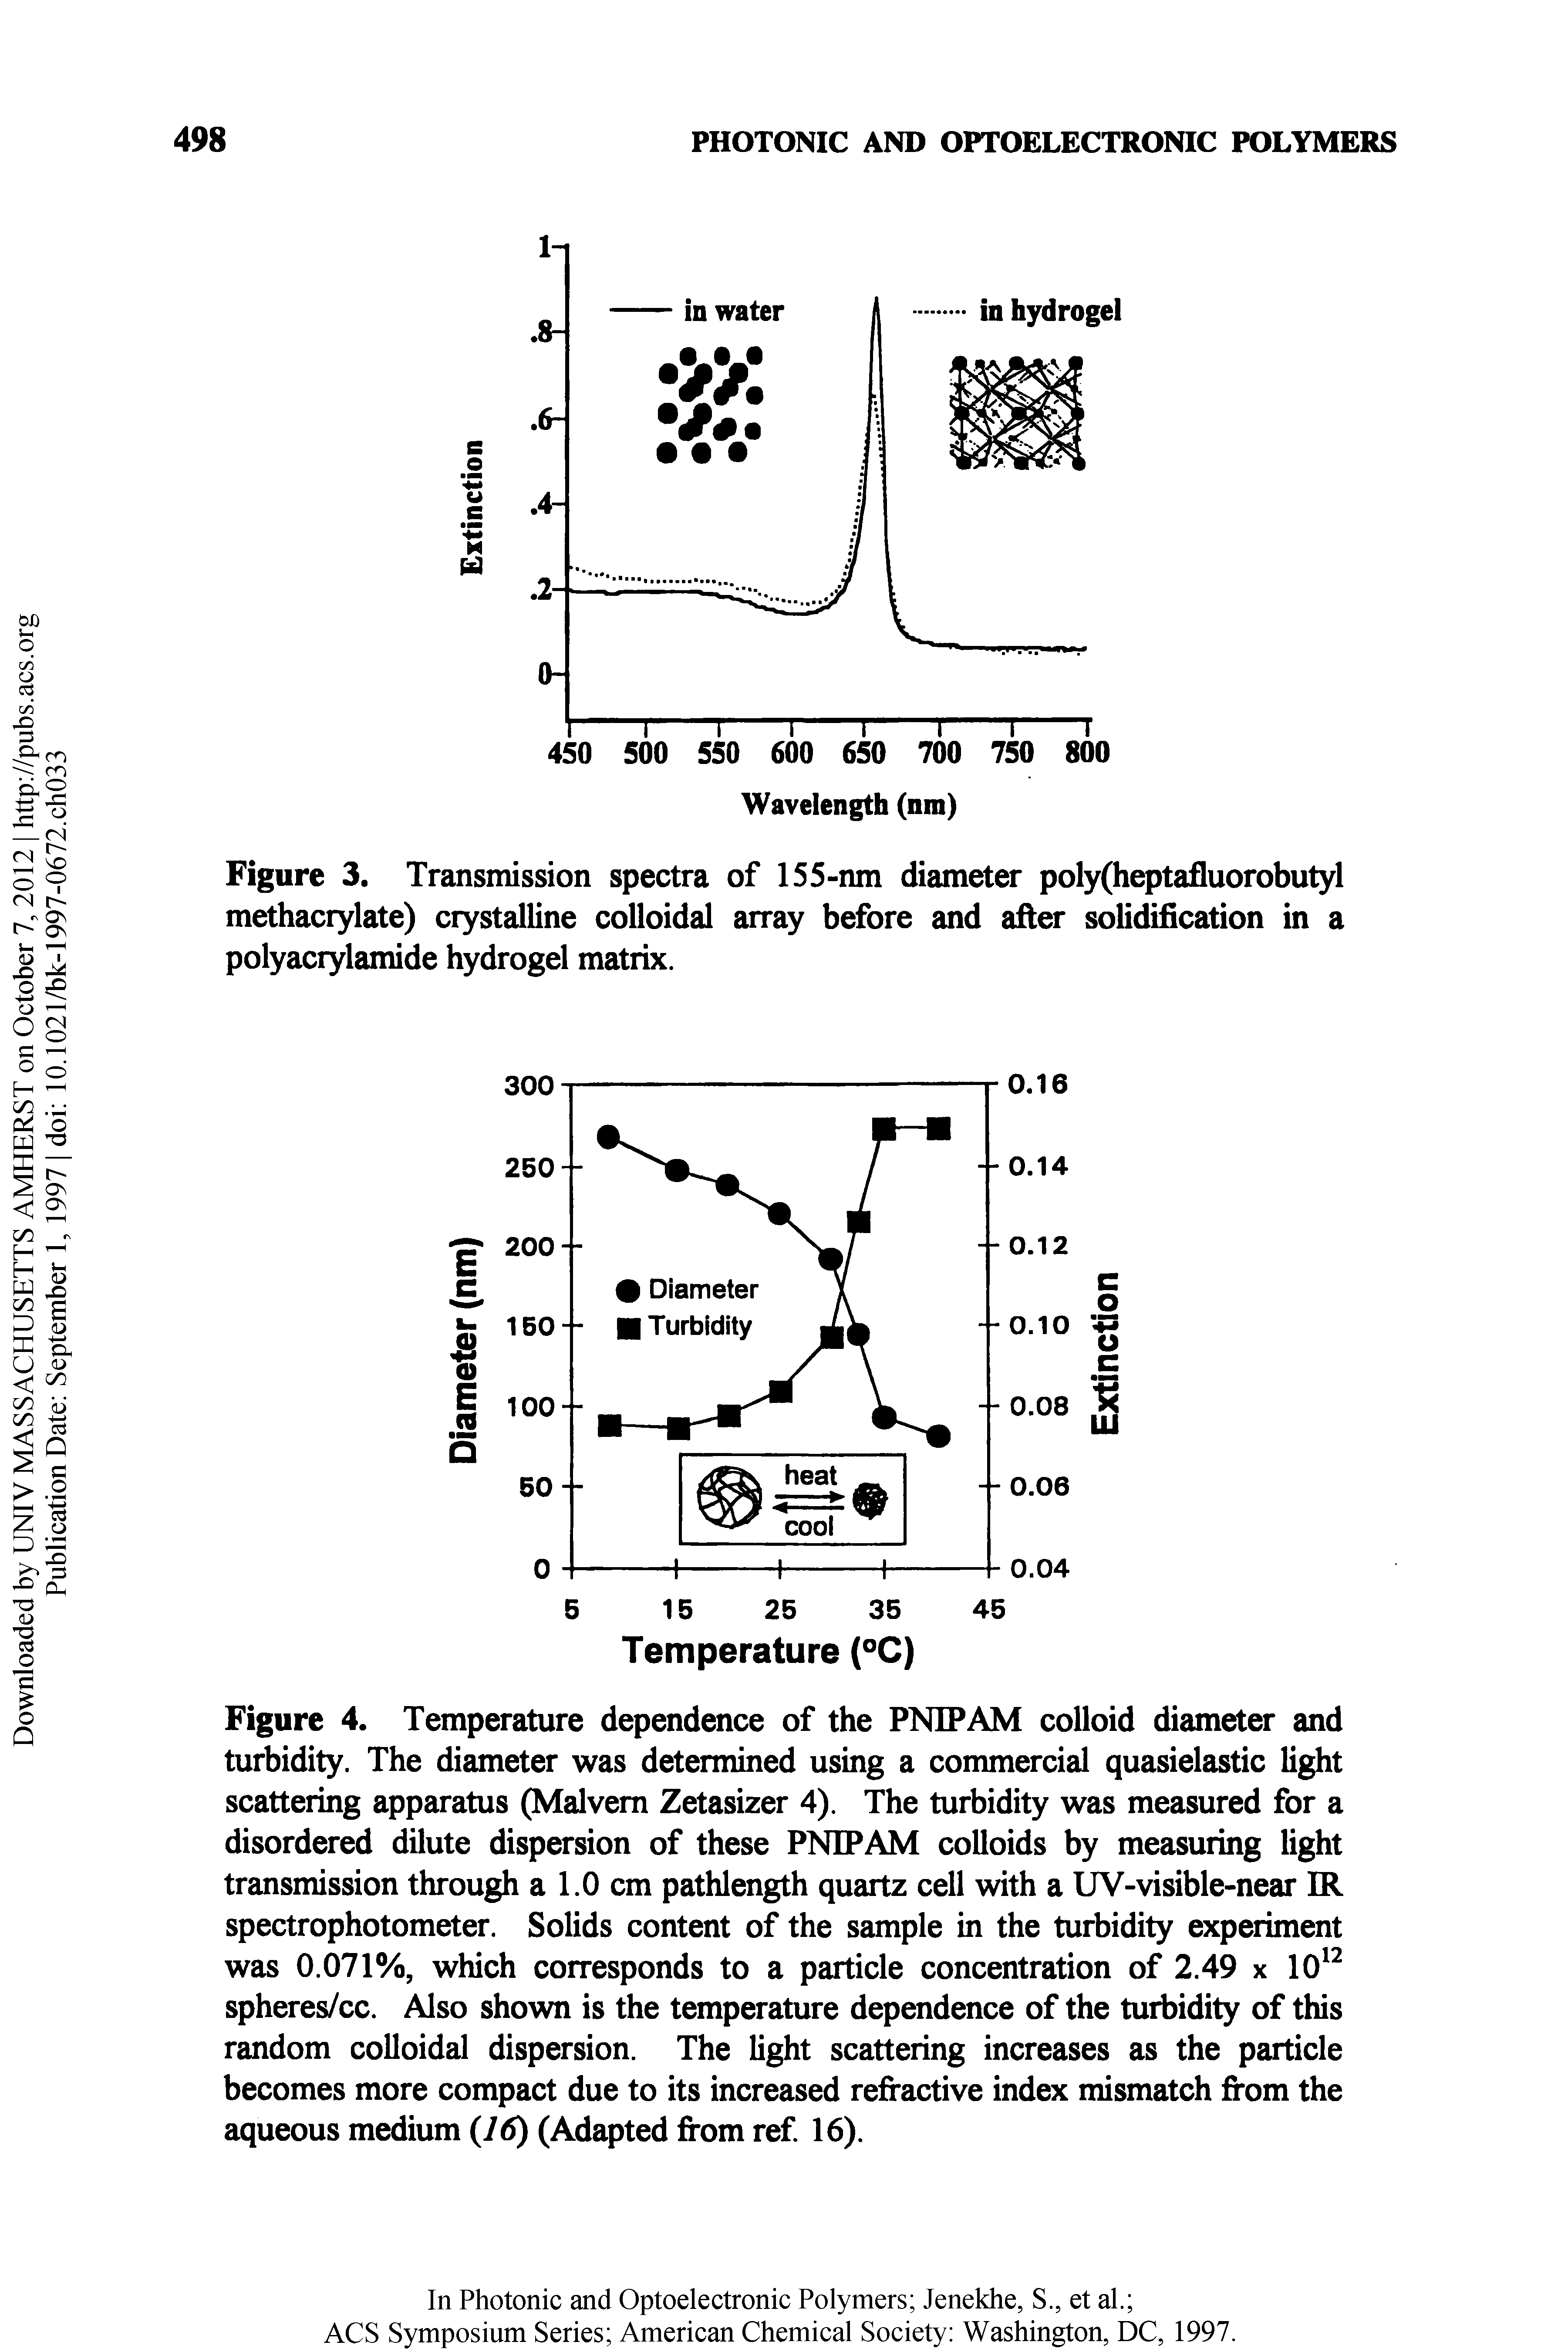 Figure 4. Temperature dependence of the PNIPAM colloid diameter and turbidity. The diameter was determined using a commercial quasielastic light scattering apparatus (Malvern Zetasizer 4). The turbidity was measured for a disordered dilute dispersion of these PNIPAM colloids by measuring light transmission through a 1.0 cm pathlength quartz cell with a UV-visible-near IR spectrophotometer. Solids content of the sample in the turbidity experiment was 0.071%, which corresponds to a particle concentration of 2.49 x 10 spheres/cc. Also shown is the temperature dependence of the turbidity of this random colloidal dispersion. The light scattering increases as the particle becomes more compact due to its increased refractive index mismatch from the aqueous medium (76) (Adapted from ref 16).